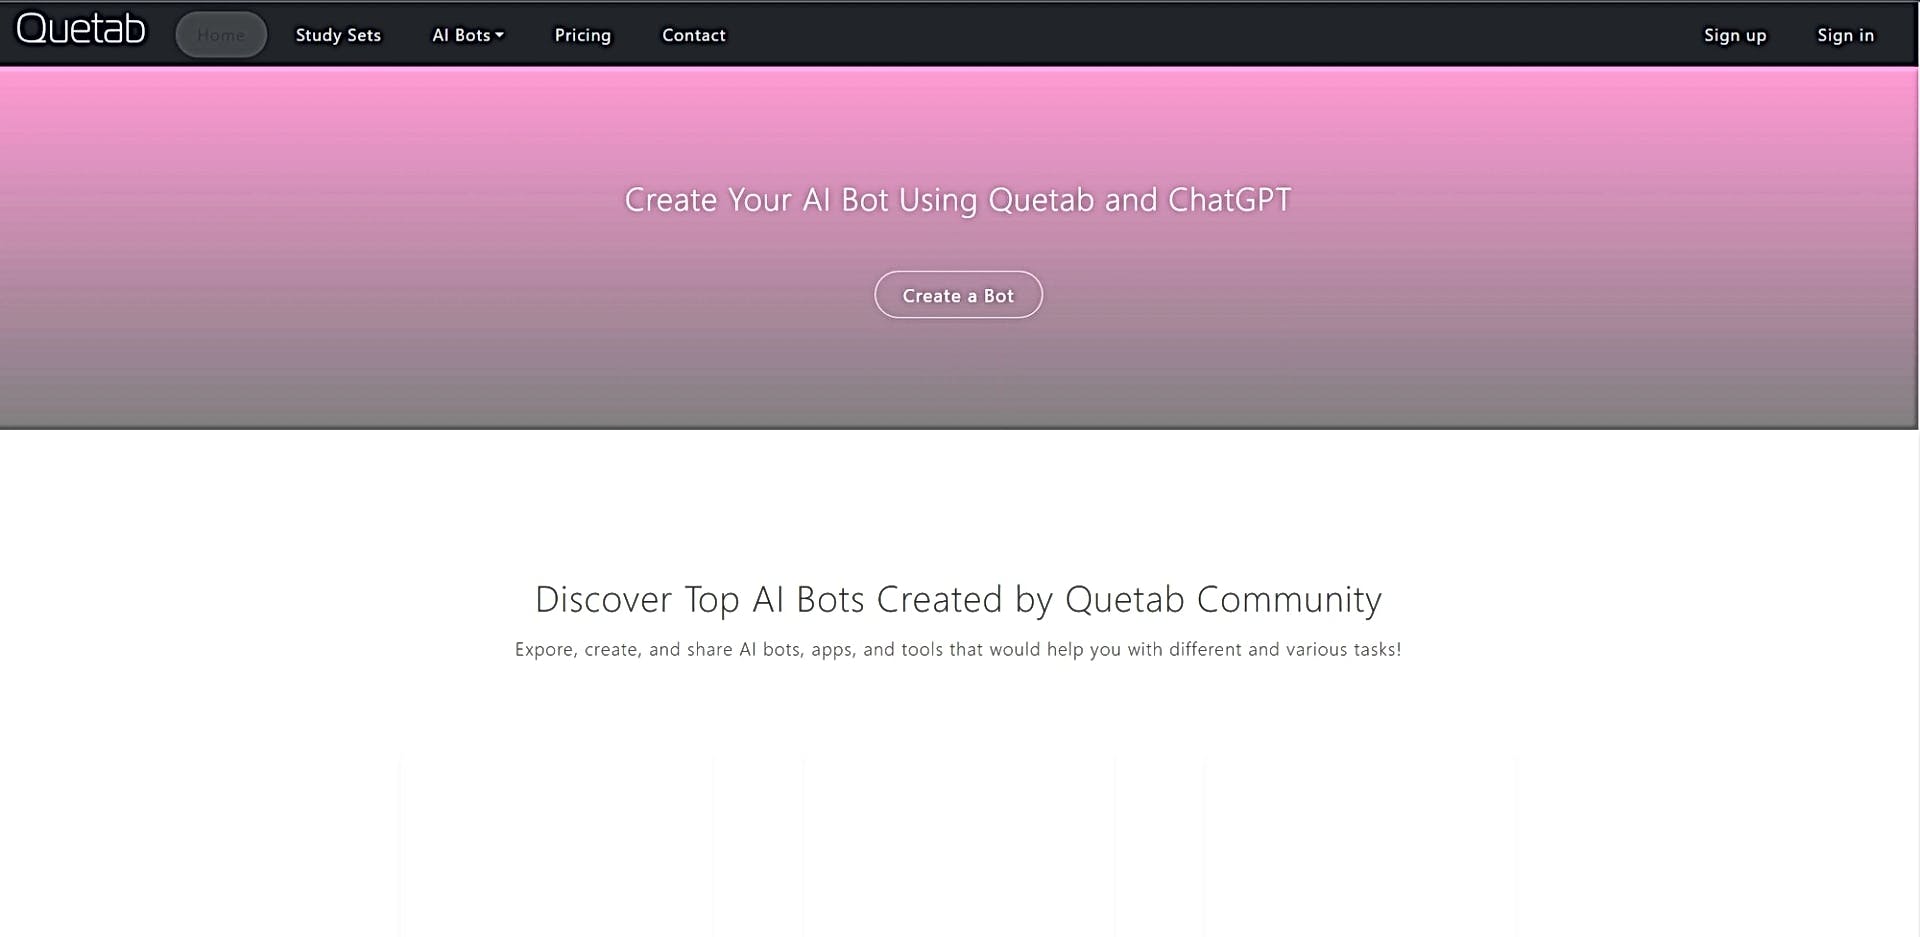 Quetab featured